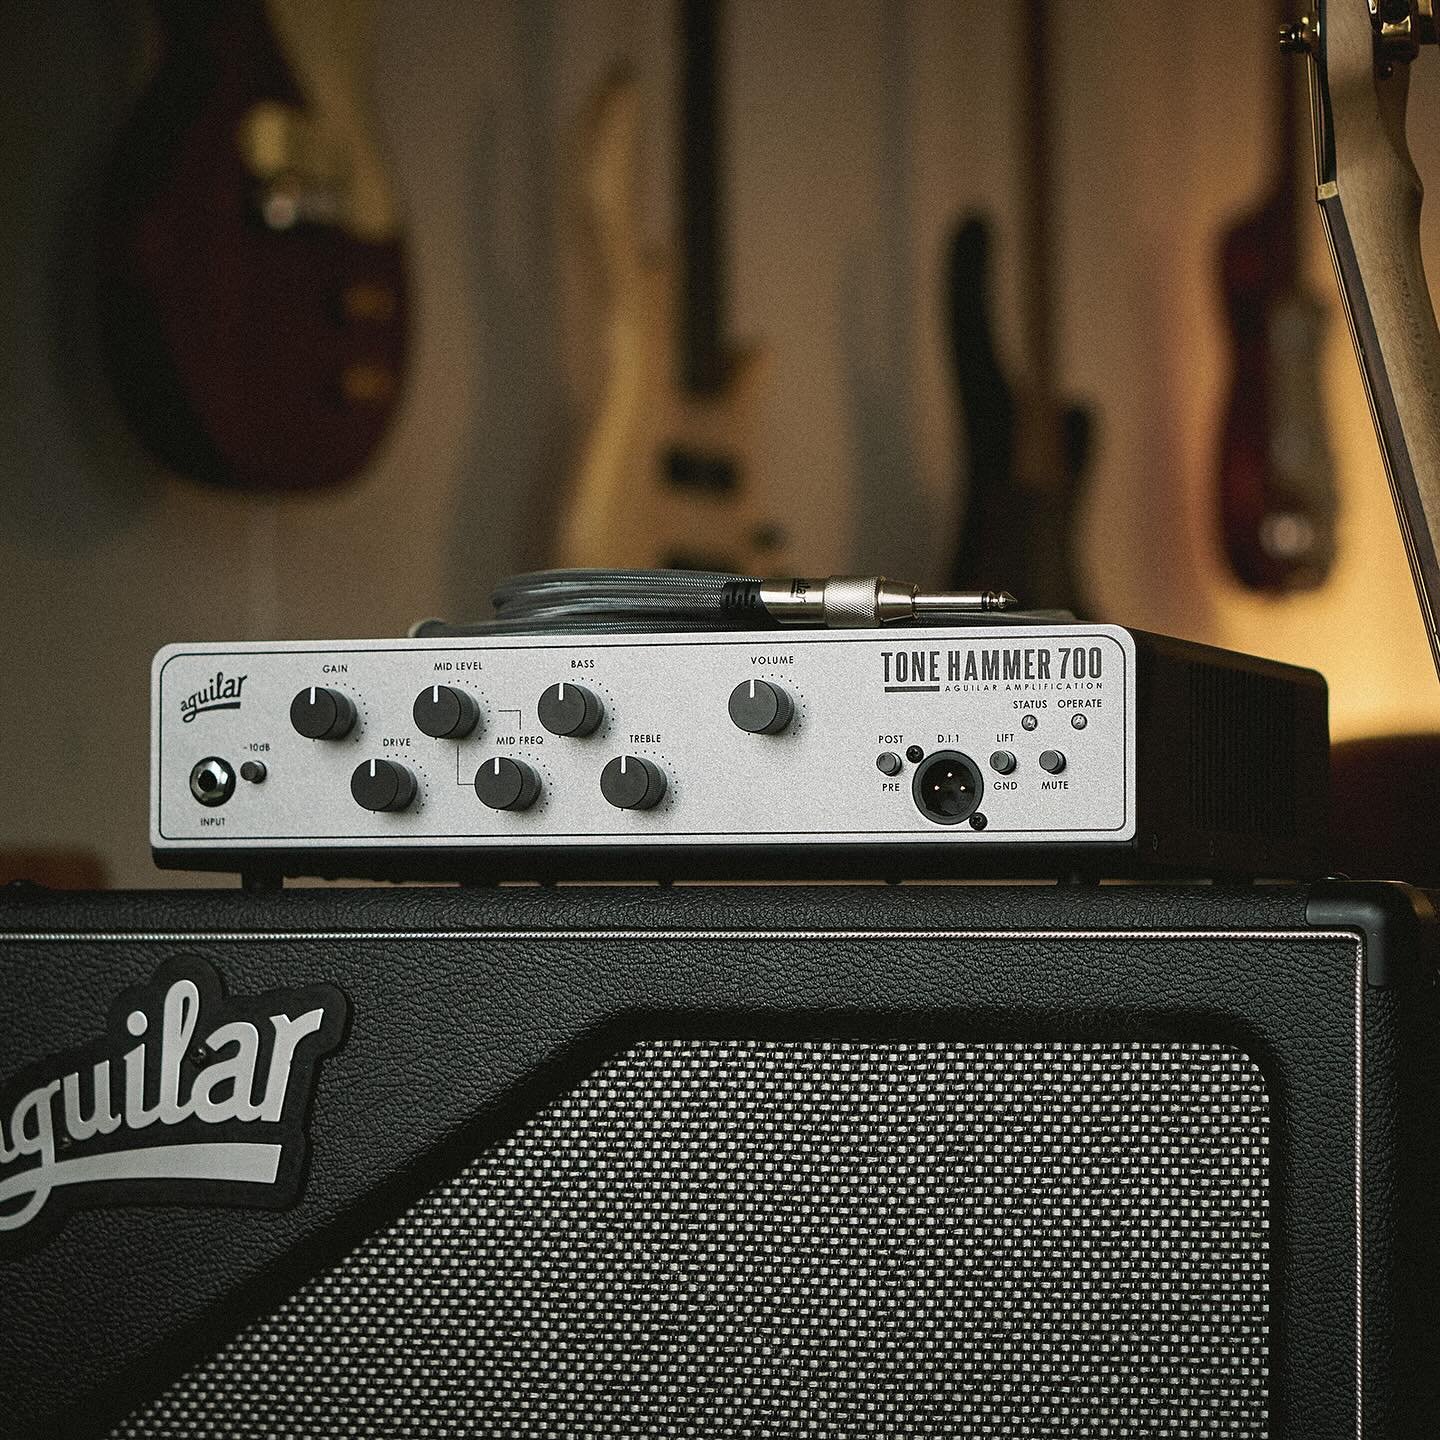 Introducing the @aguilaramp next-gen Tone Hammer and AG heads!
&nbsp;
Features:
✅Aguilar Cabinet Suite with DSP HP simulation outputs.
✅Additional DI output for independent management.
✅Headphone jack &amp; auxiliary input.
✅Sleek modern design.
✅Ava